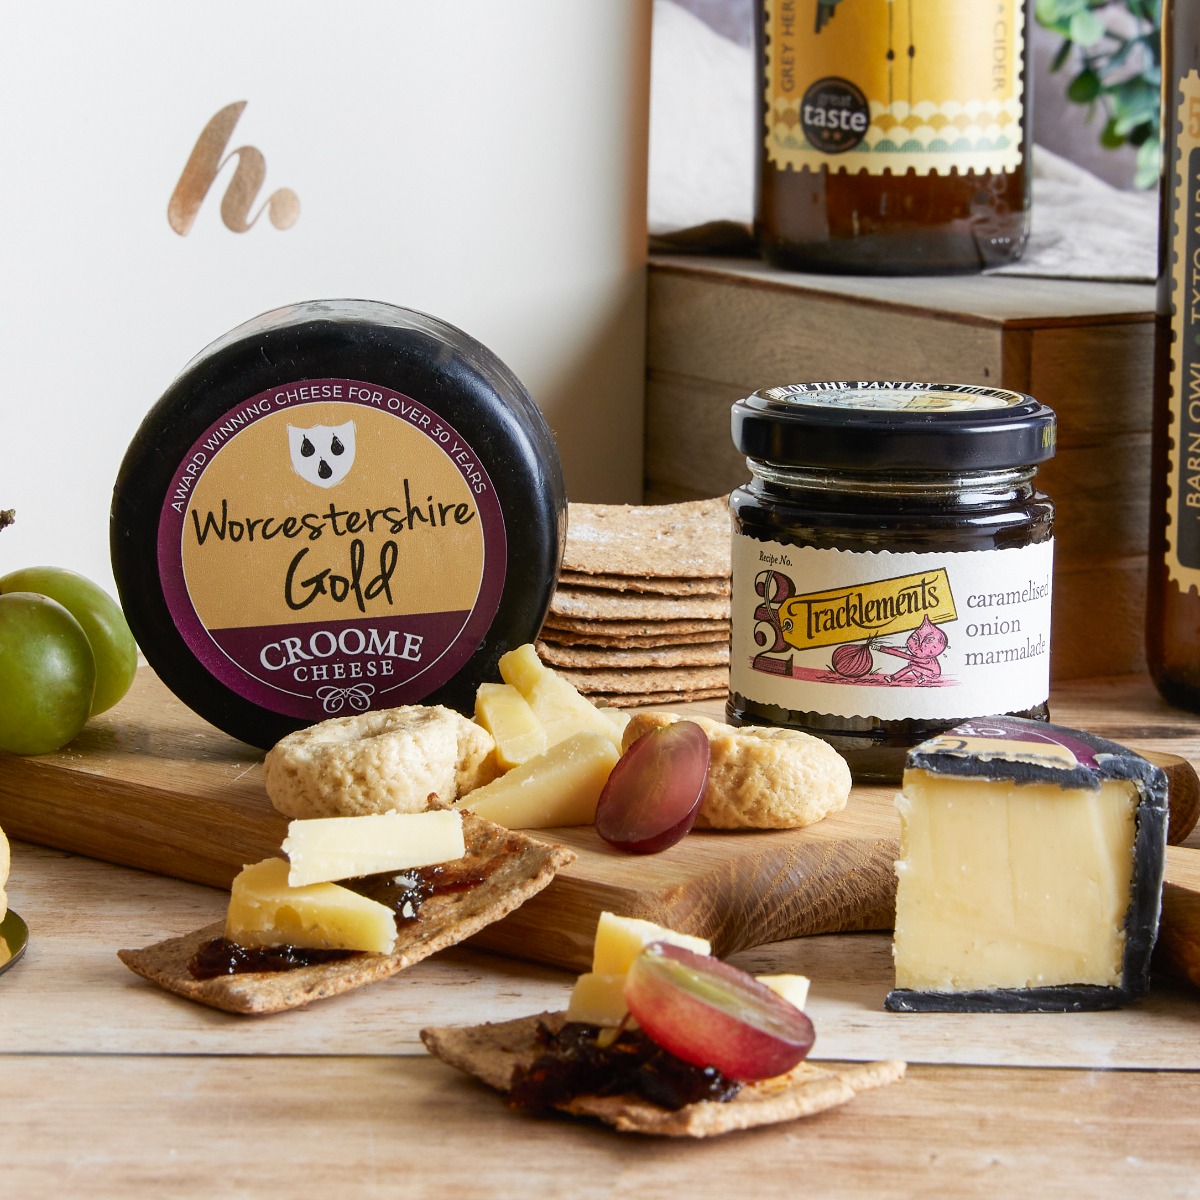 Close up of the cheese and chutney in the Cider and Cheese Hamper